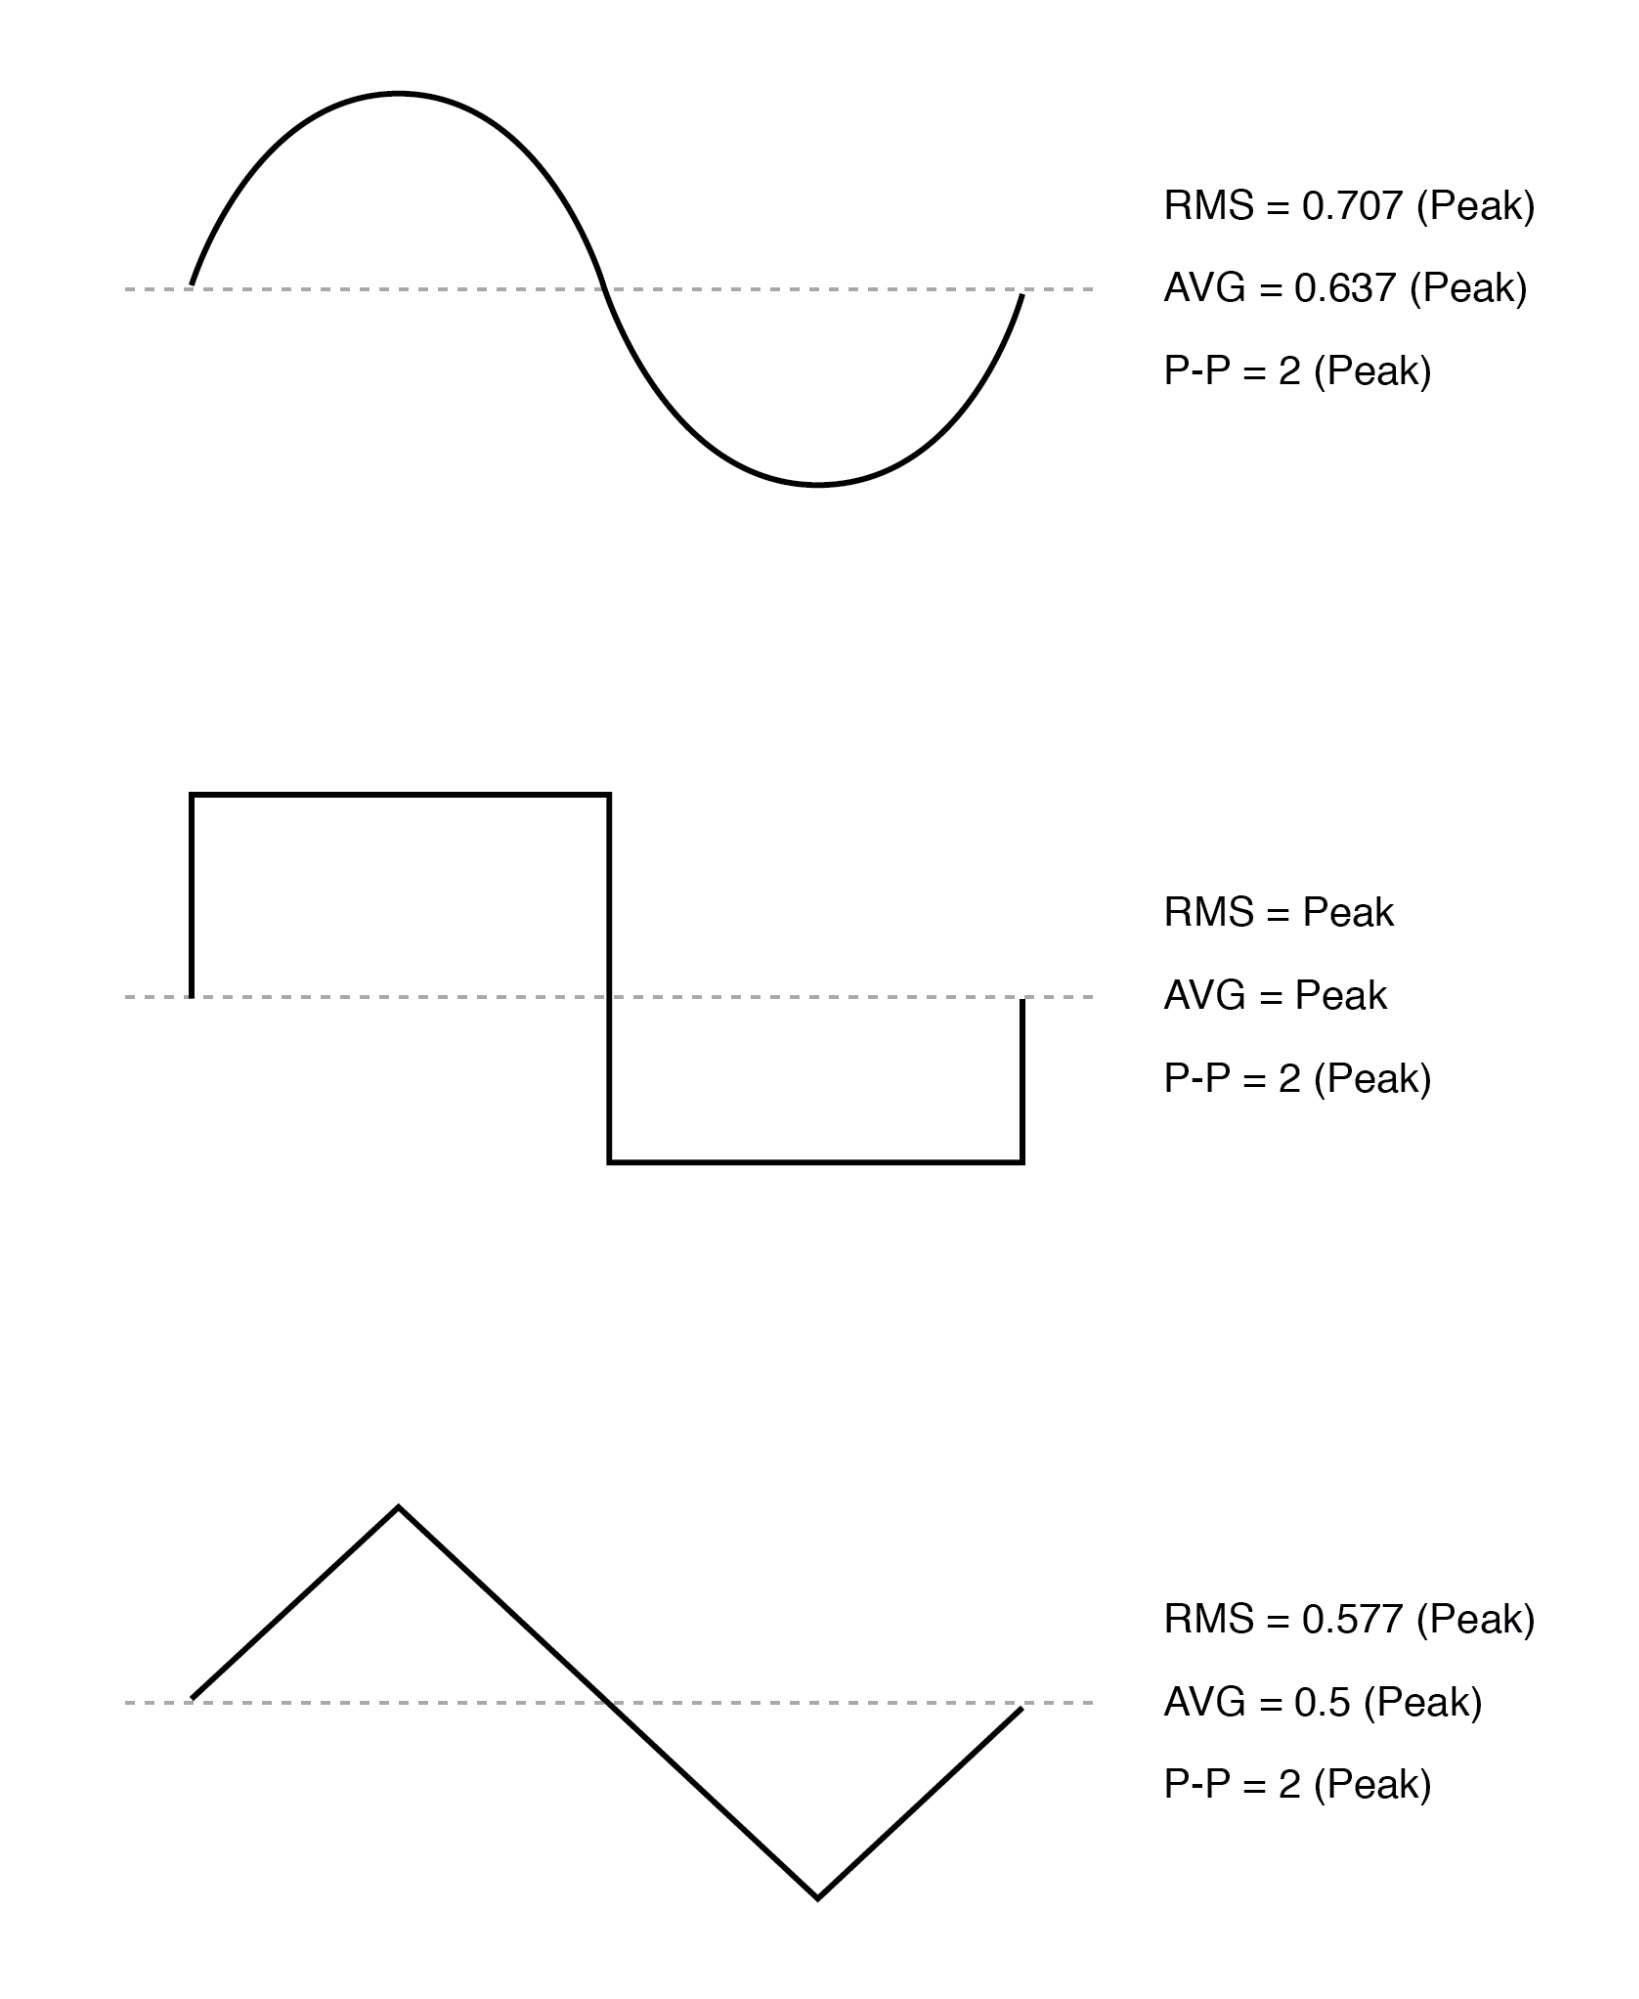 RMS, Average, and Peak-to-Peak values for sine, square, and triangle waves.